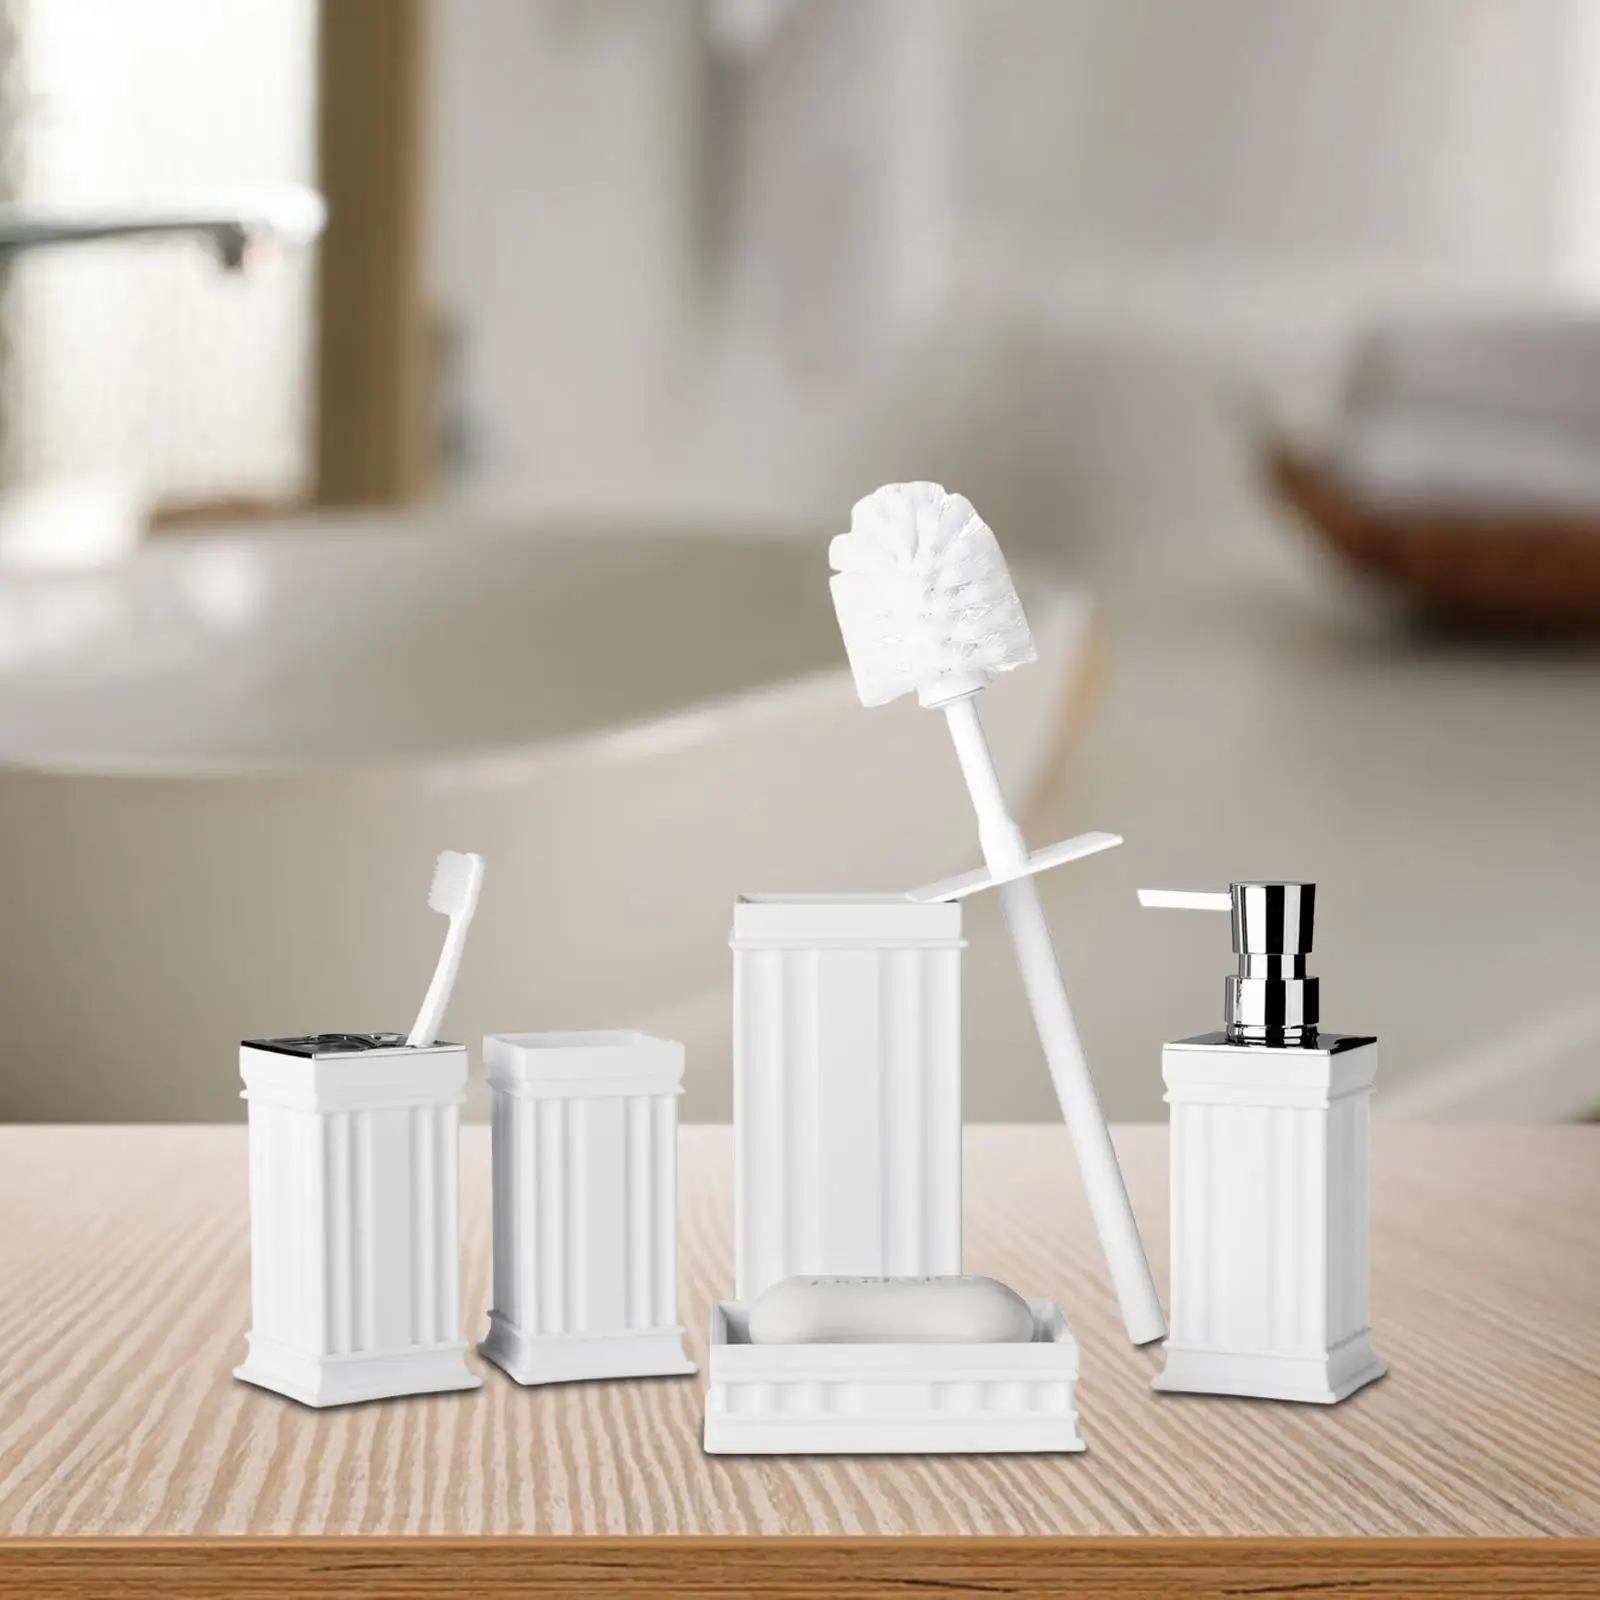 5 Pieces Bathroom Accessories Toothbrush Holder Toilet Brush with Holder Lotion Dispenser Bath Set for Housewarming Gift Hotel